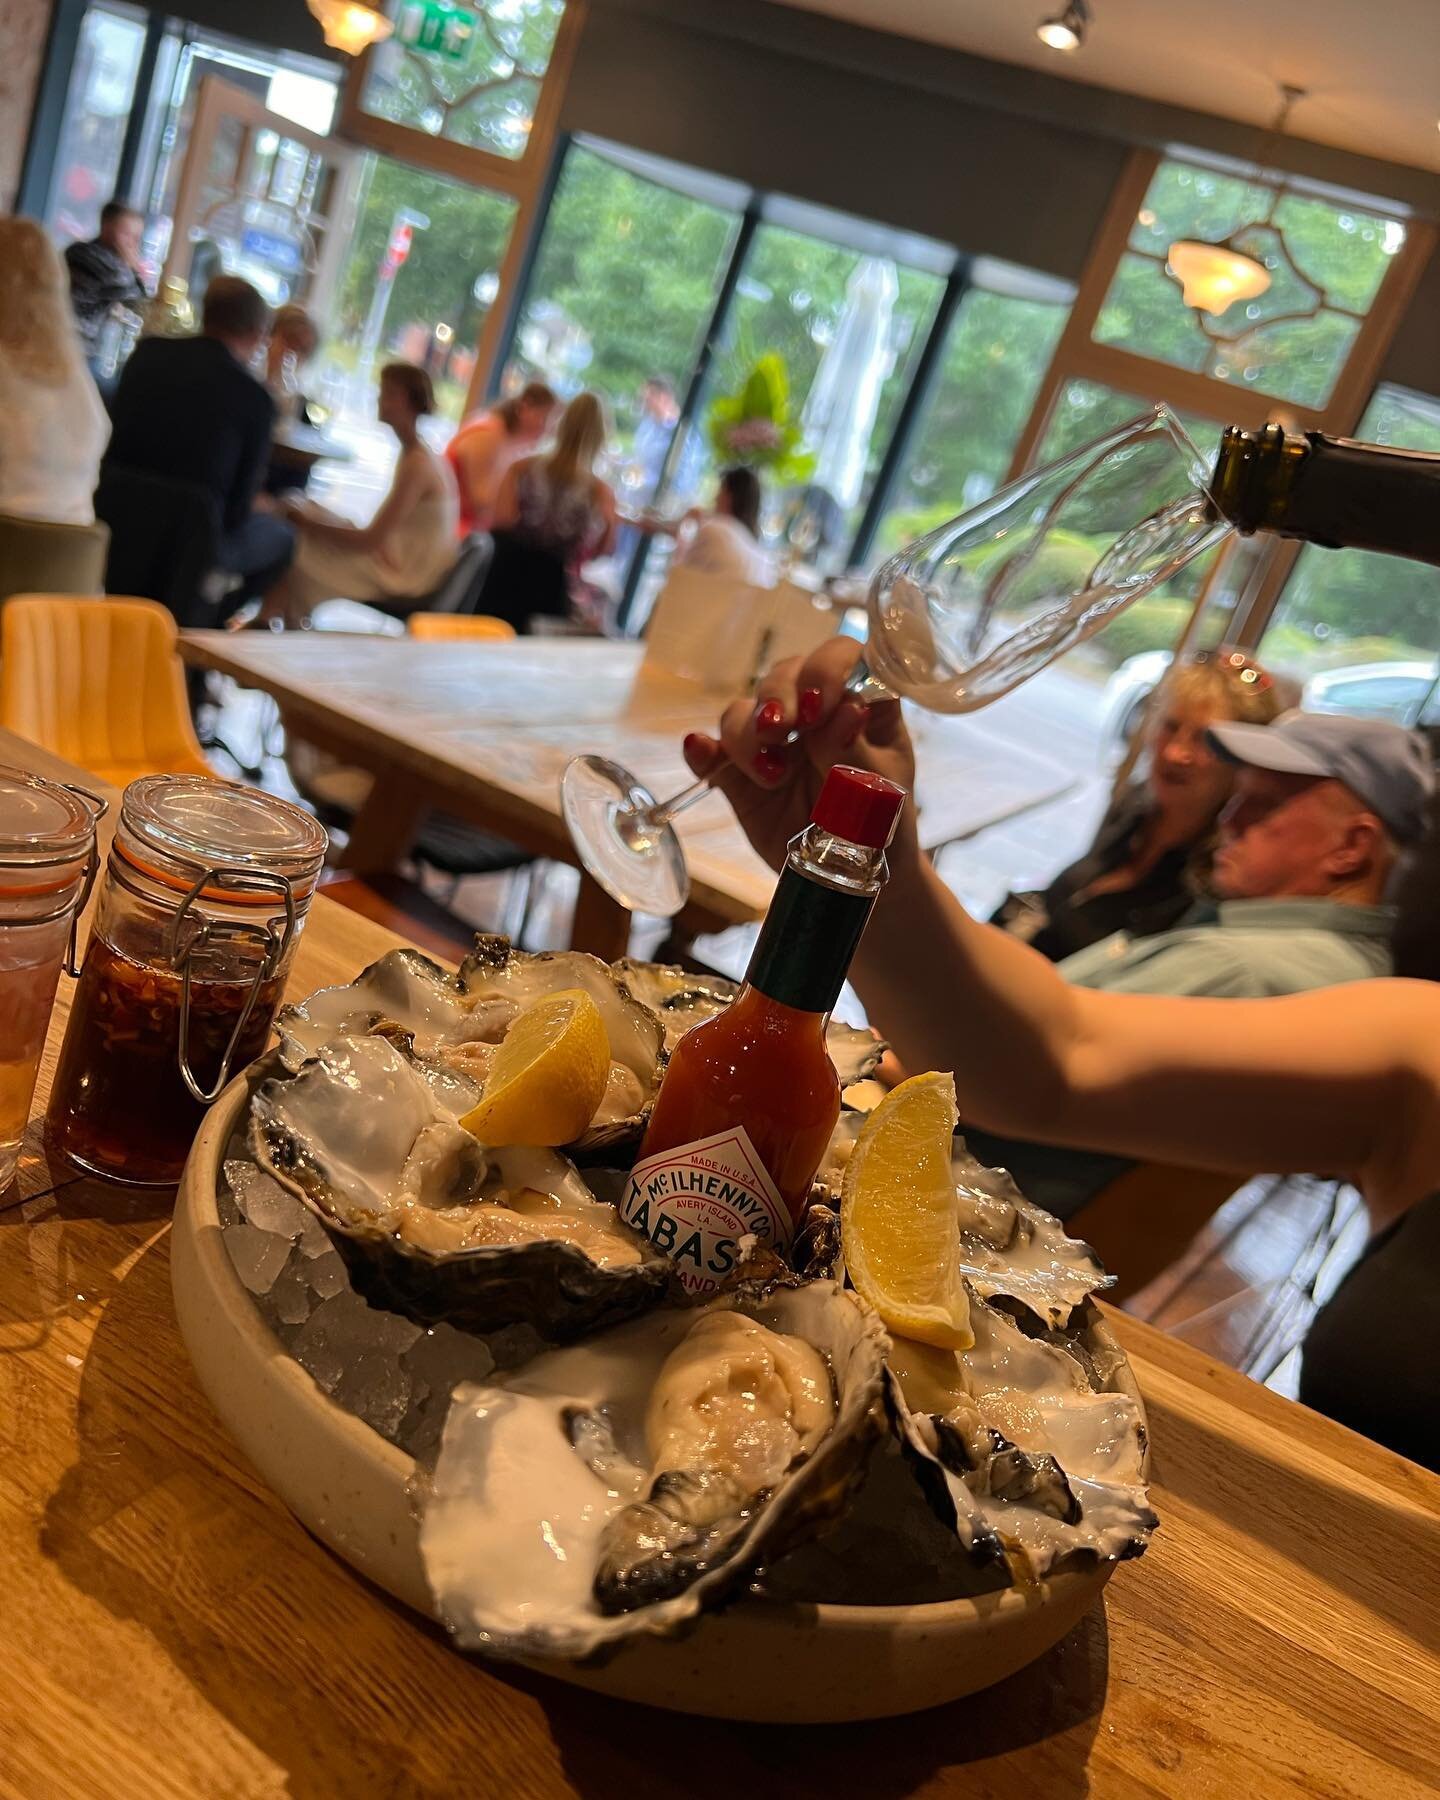 Oyster &amp; champagne night 🦪🍾

Thanks to everybody that made last night such a great night! 

Our next Oyster &amp; champagne event will be announced very soon 🥂

Join us today for happy hour 3pm - 6pm 🍻

#oystersandchampagne #oysters #champagn